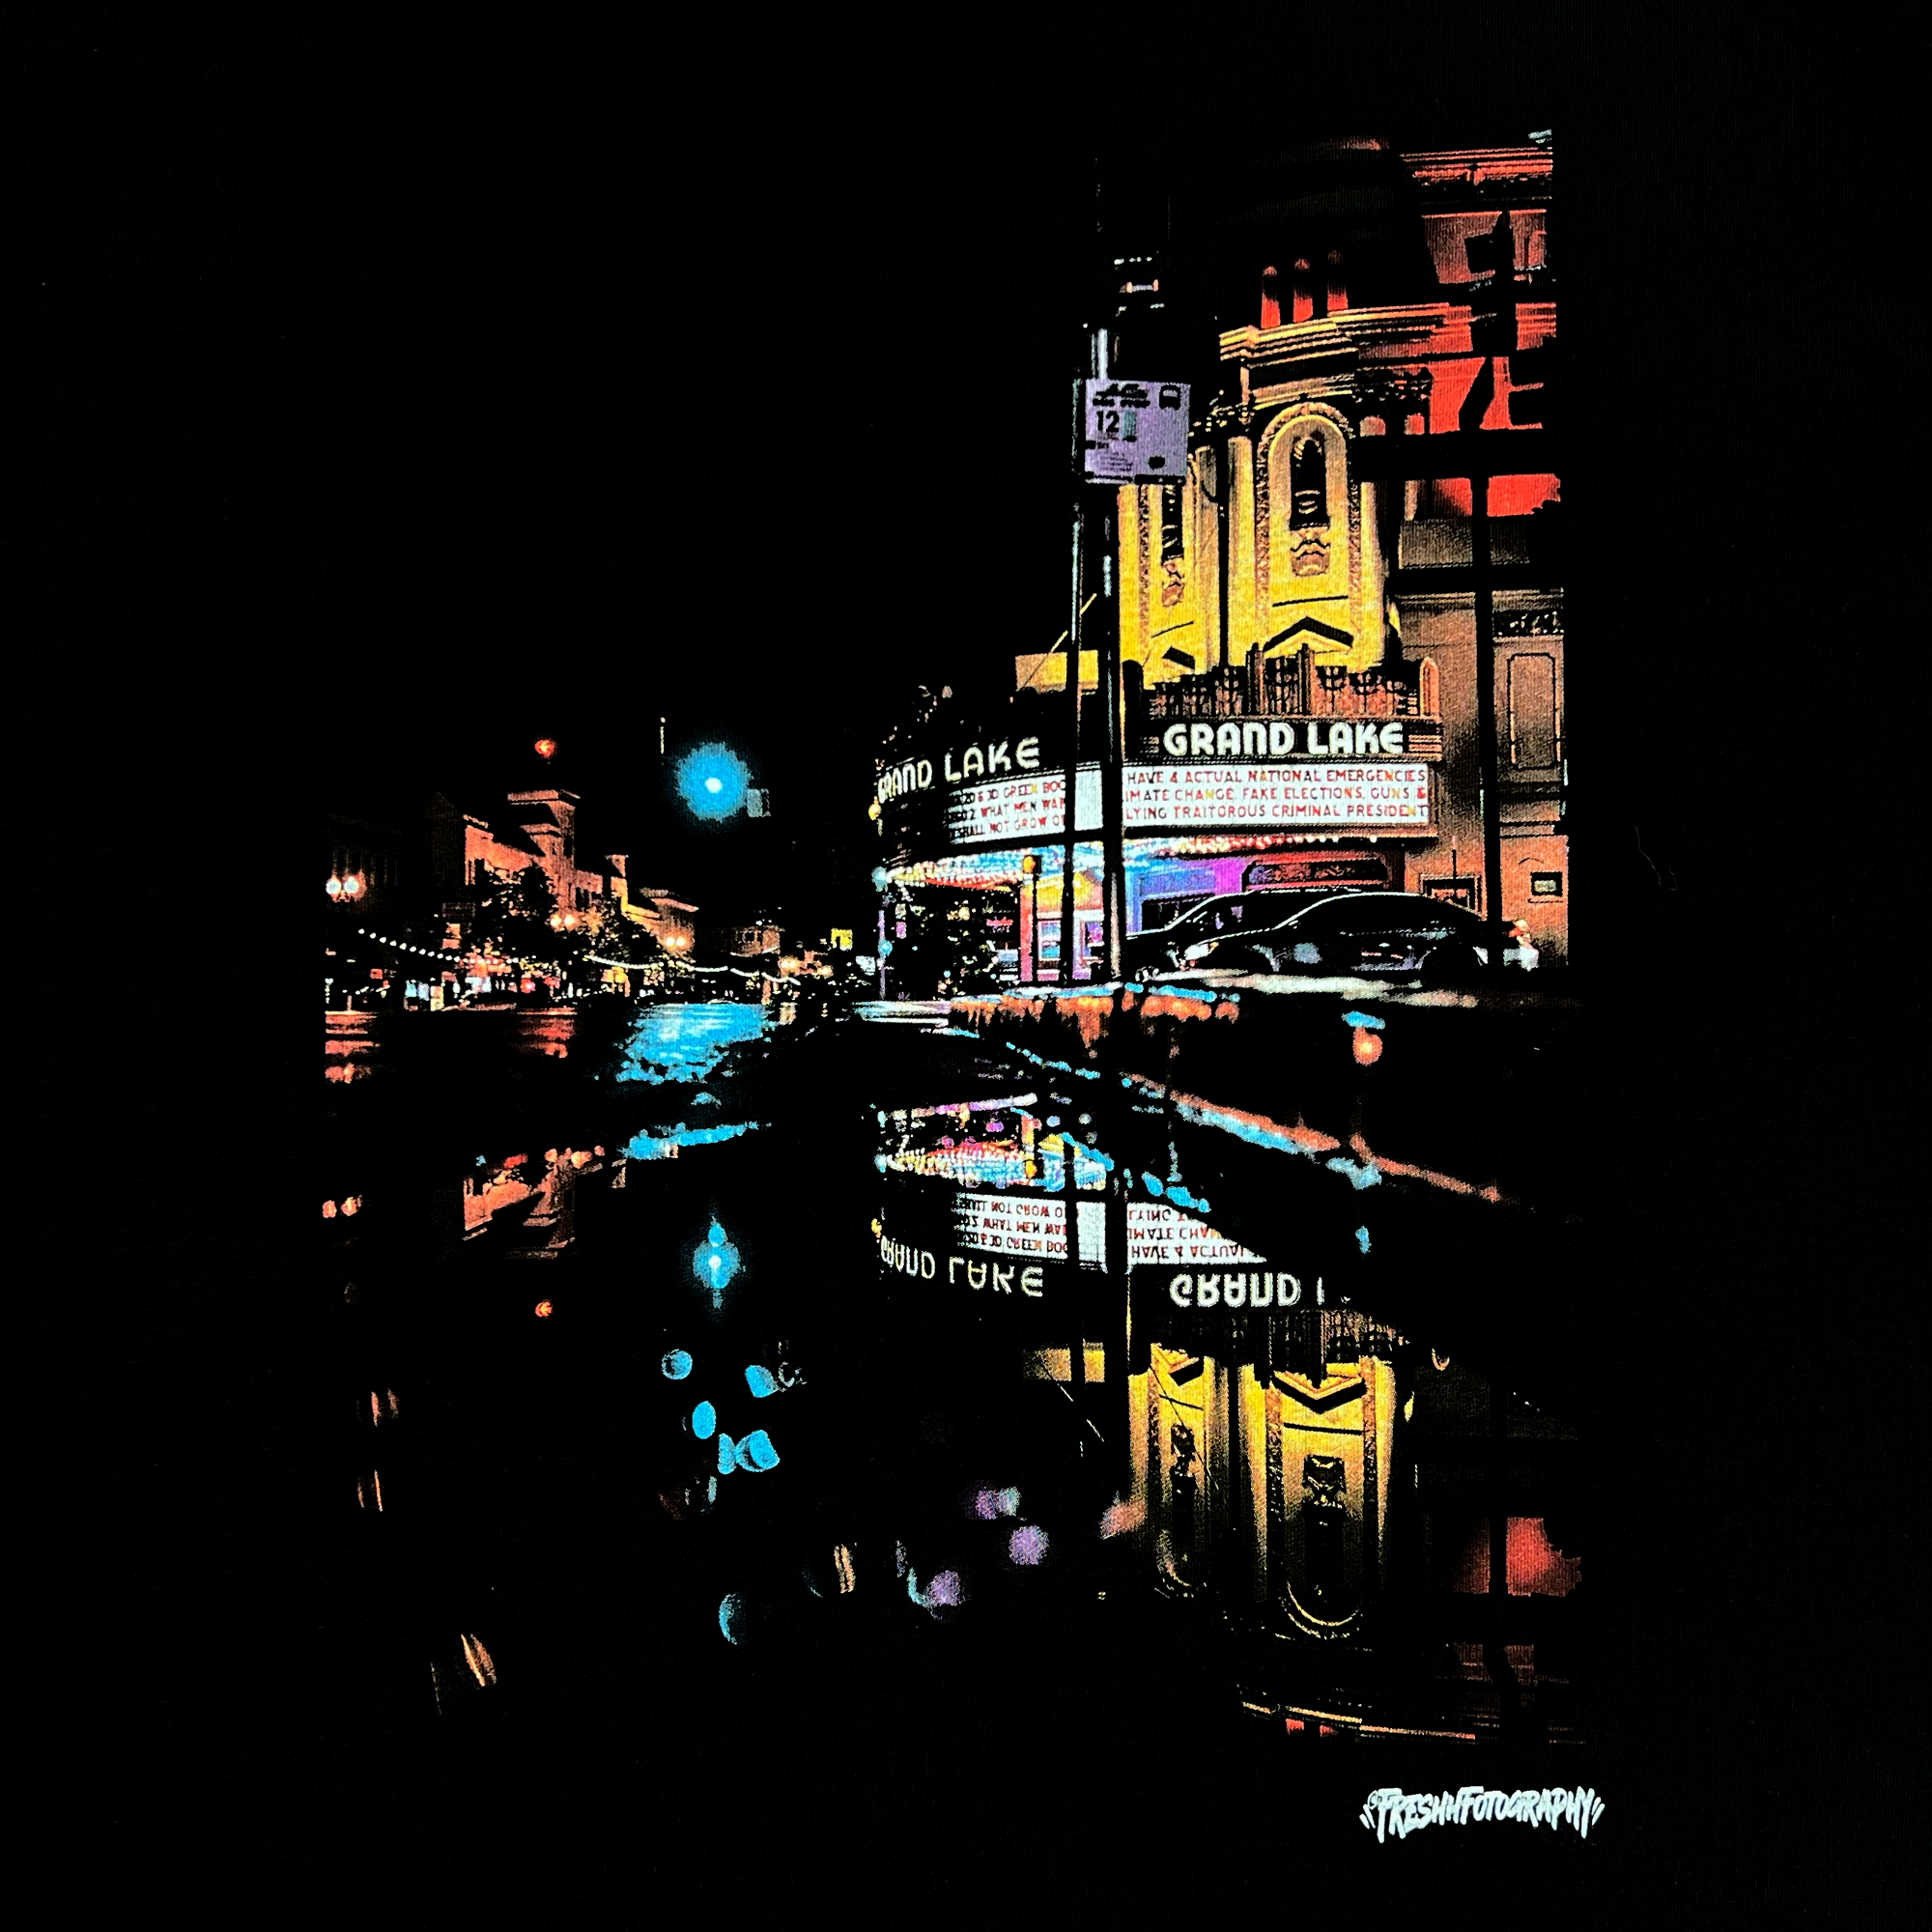 Detailed close-up of the image of a rainy night reflecting street lights and The Grand Lakes Theatre on a black t-shirt.